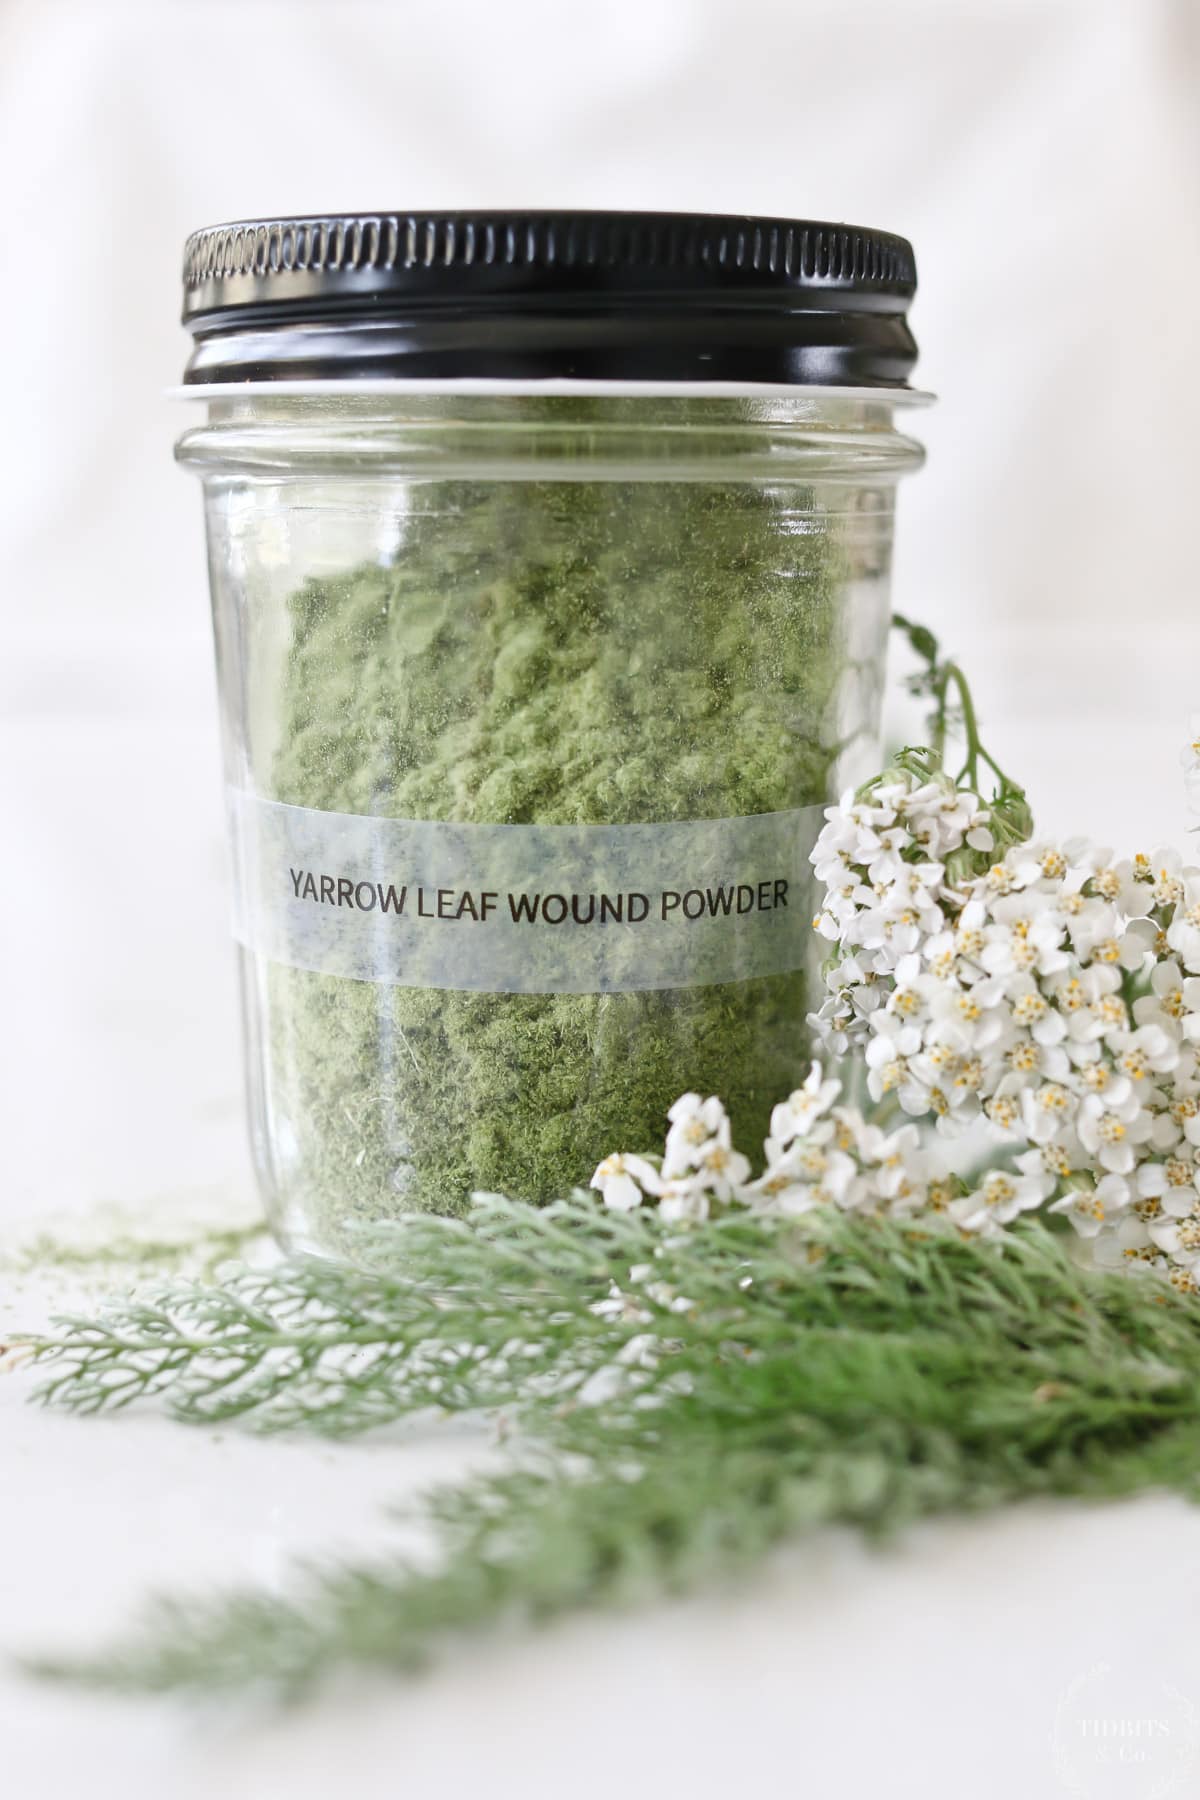 Yarrow wound powder for stopping bleeding and healing wounds